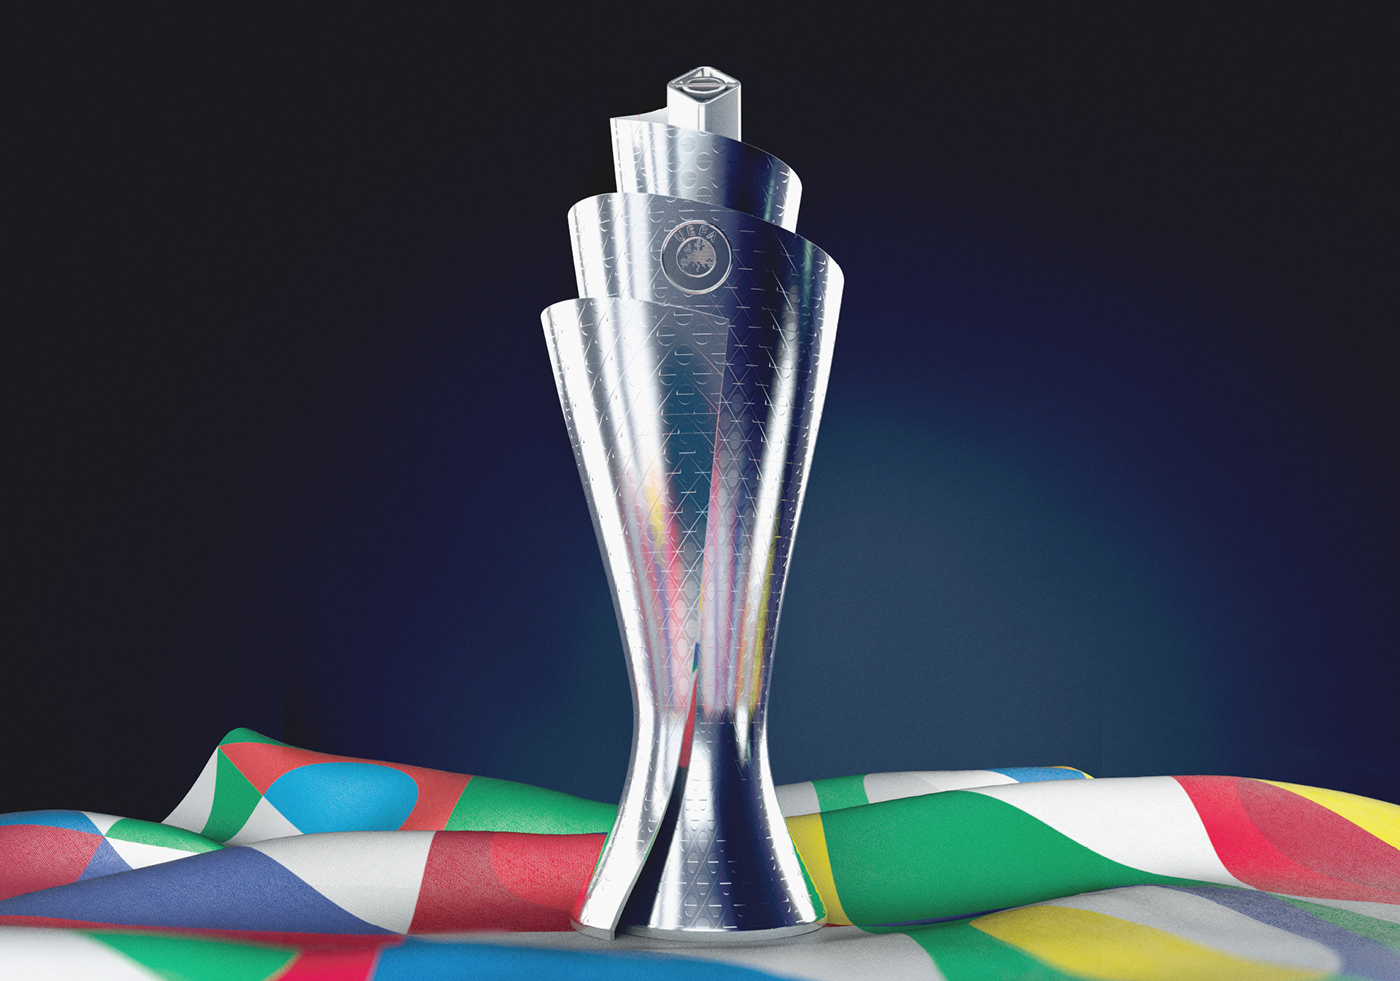 football trophy uefa identity pattern colorfull system flag Tournament